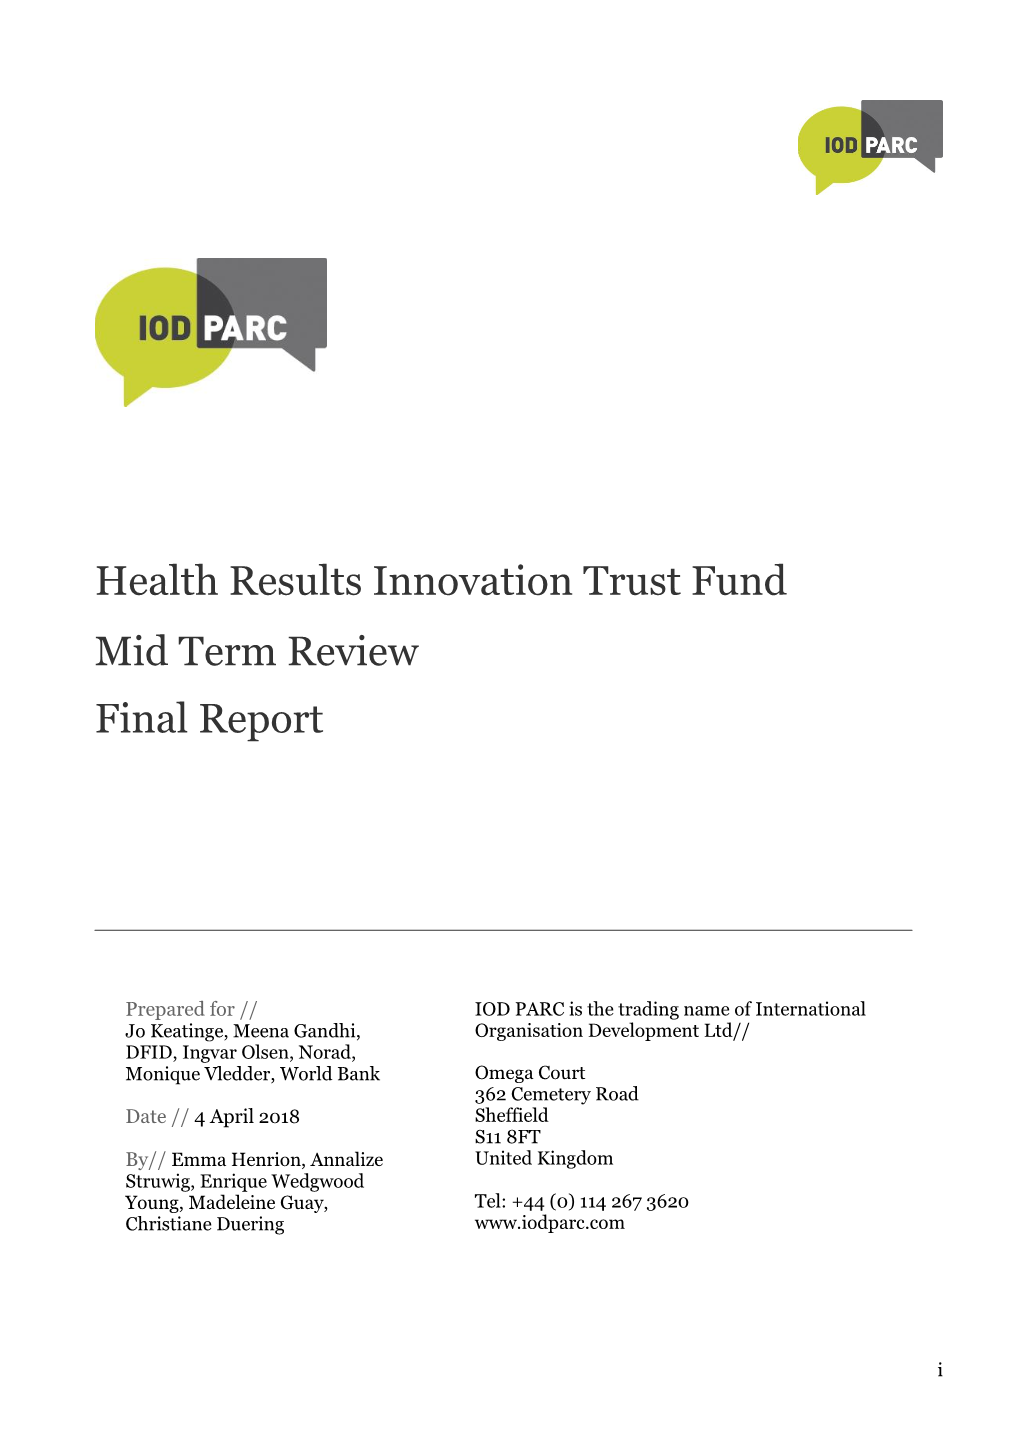 Health Results Innovation Trust Fund Mid Term Review Final Report